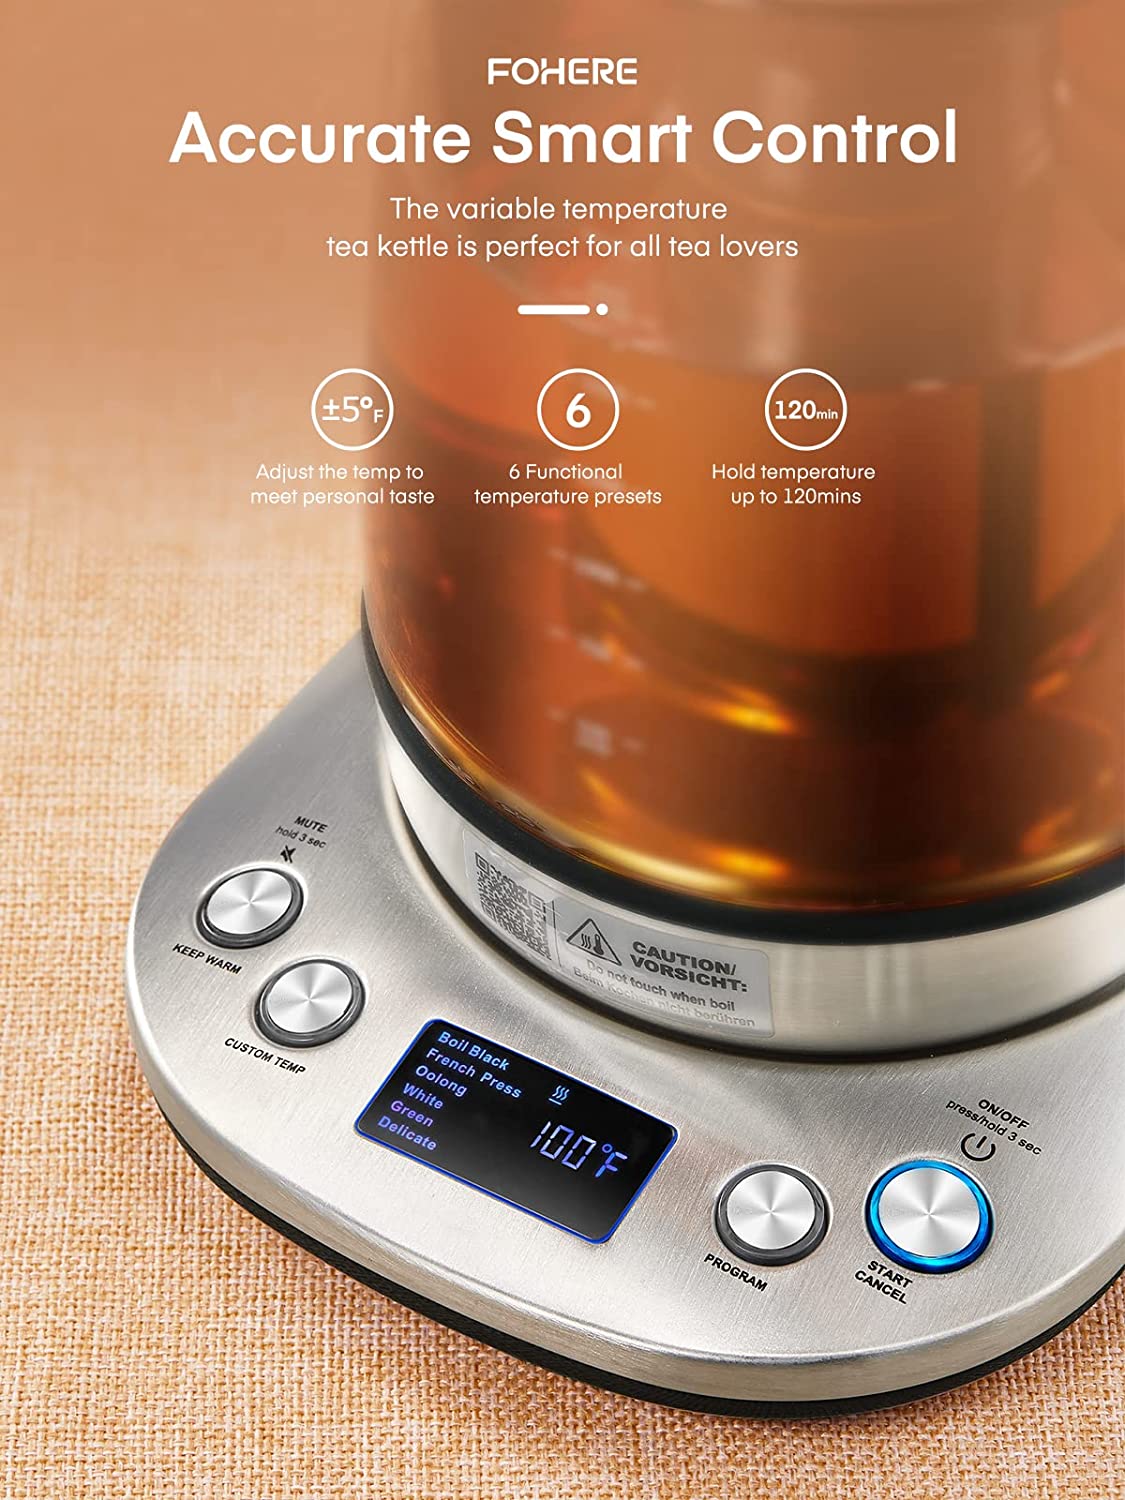 accurate smart control, Tea Kettle Electric, FOHERE Electric Kettle Temperature Control with 6 Presets, 2Hr Keep Warm, Removable Tea Infuser, Stainless Steel Glass Boiler, BPA Free, 1.7L